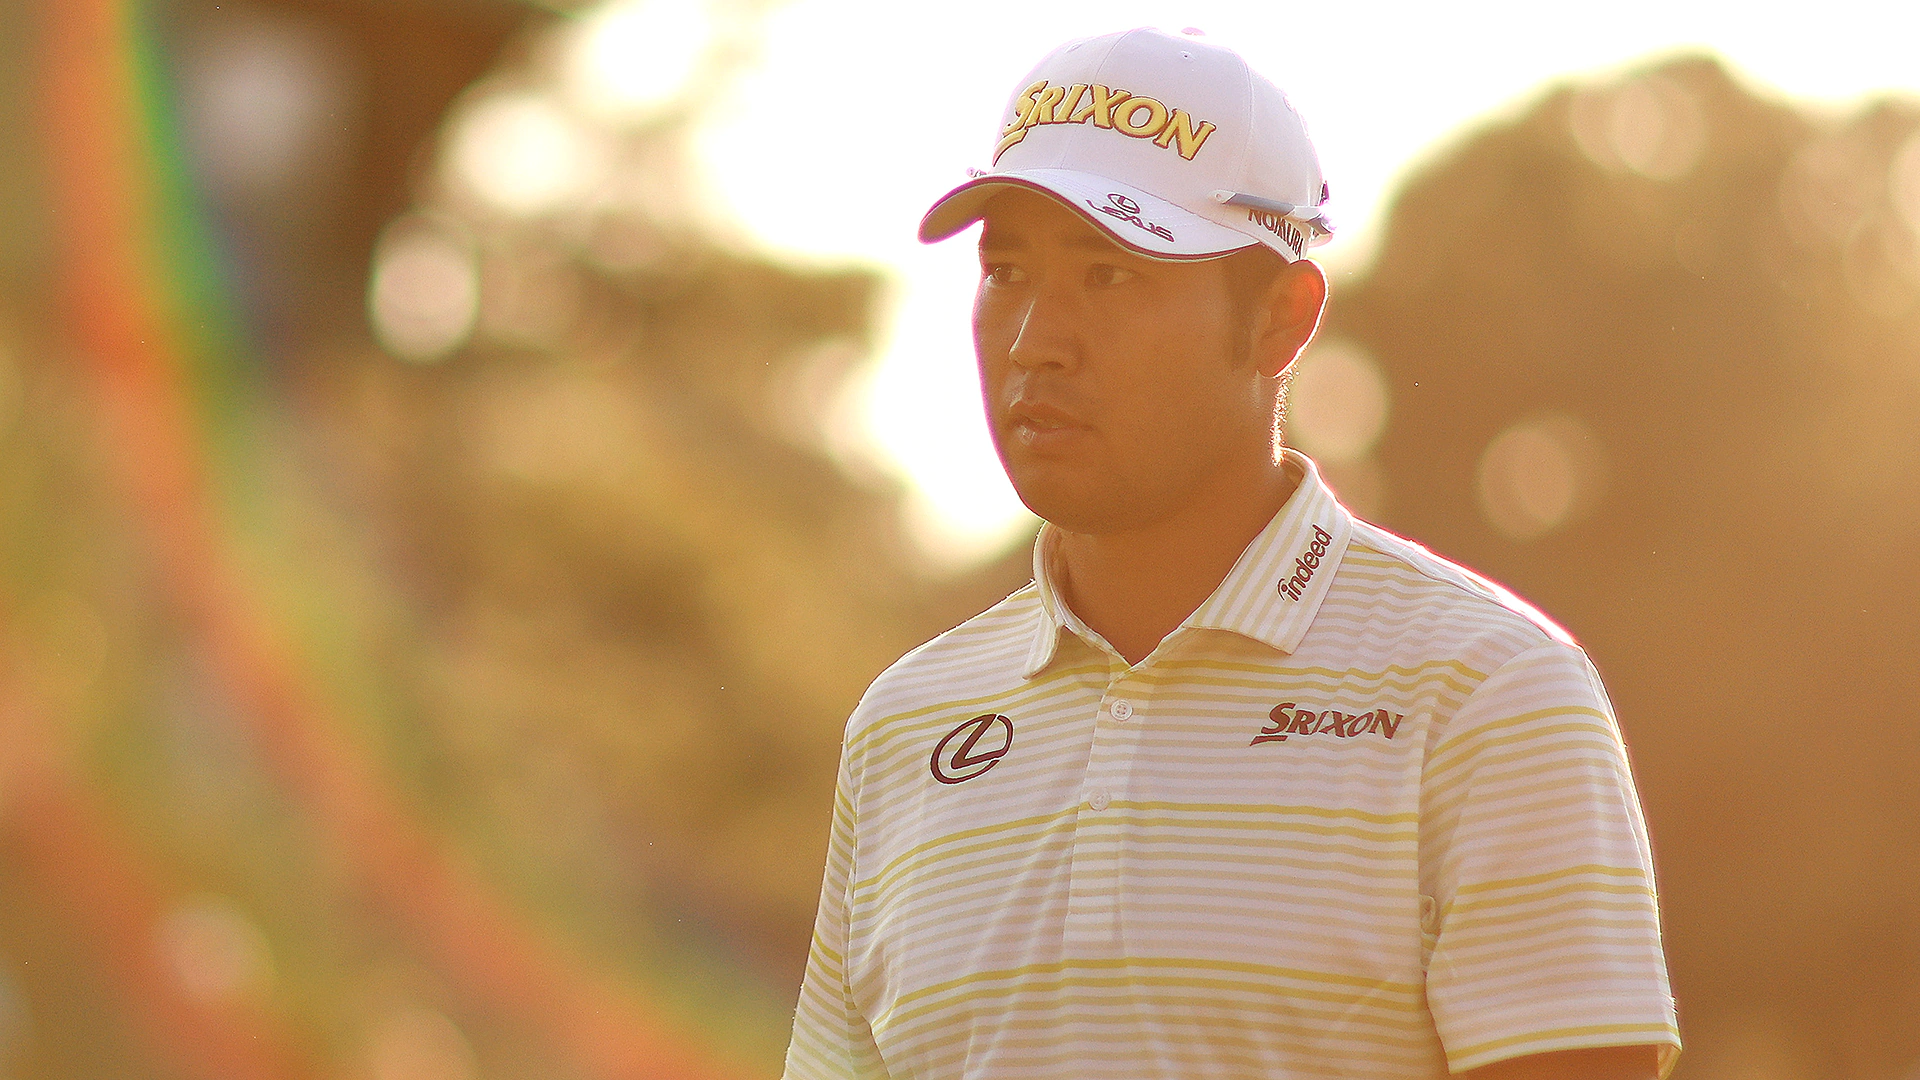 Hideki Matsuyama becomes first male Japanese player to win a major at the Masters